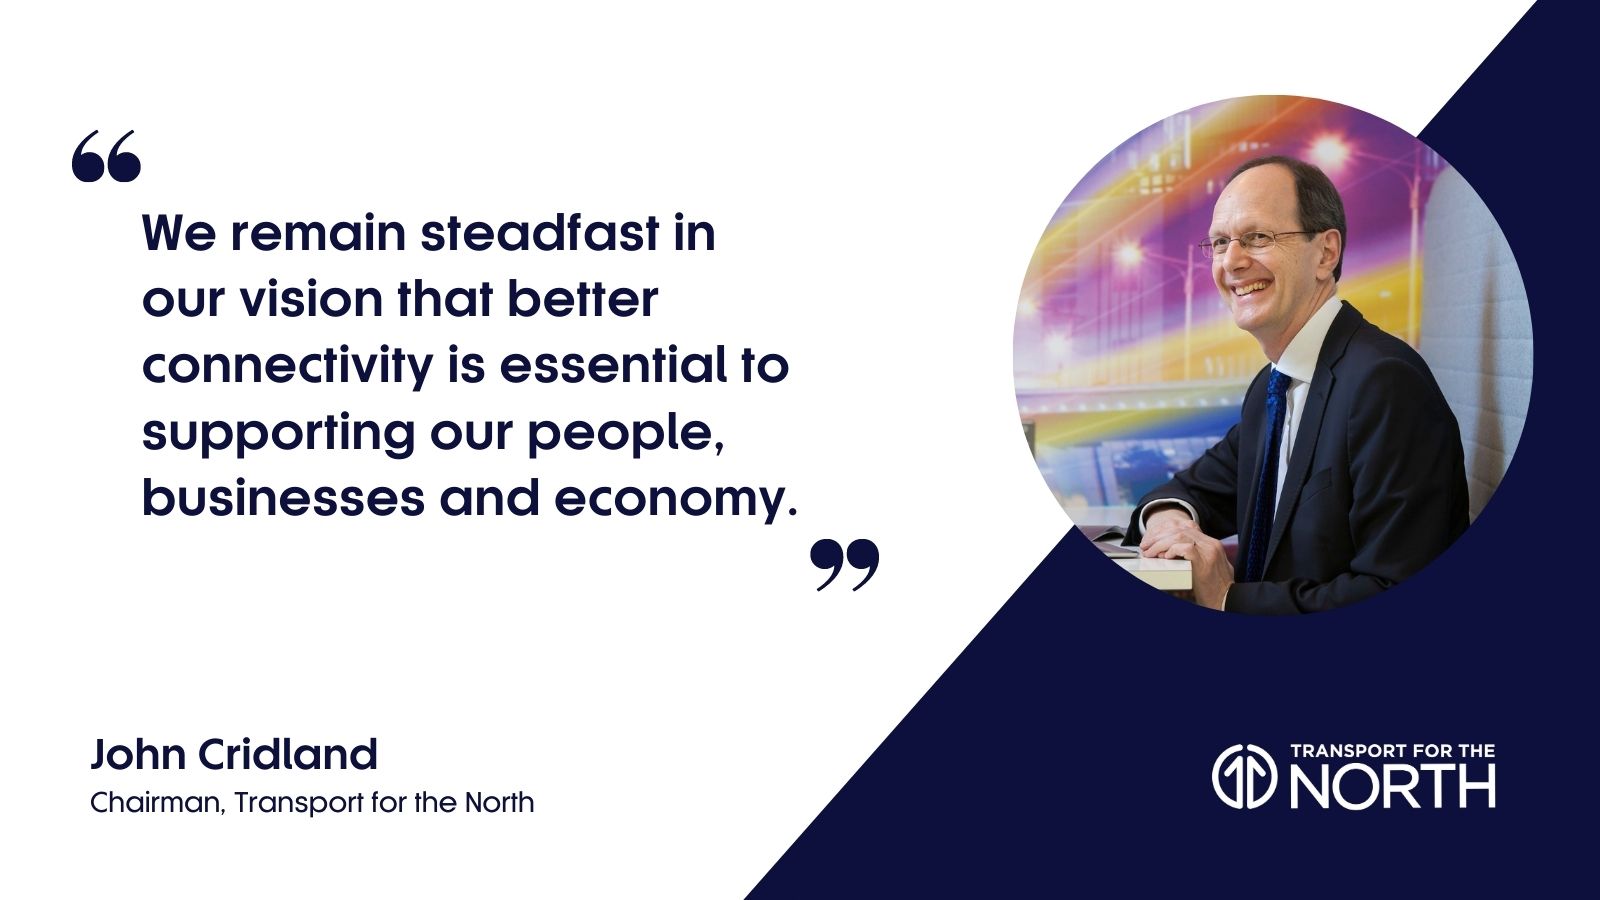 Quote from John Cridland about Transport for the North's vision